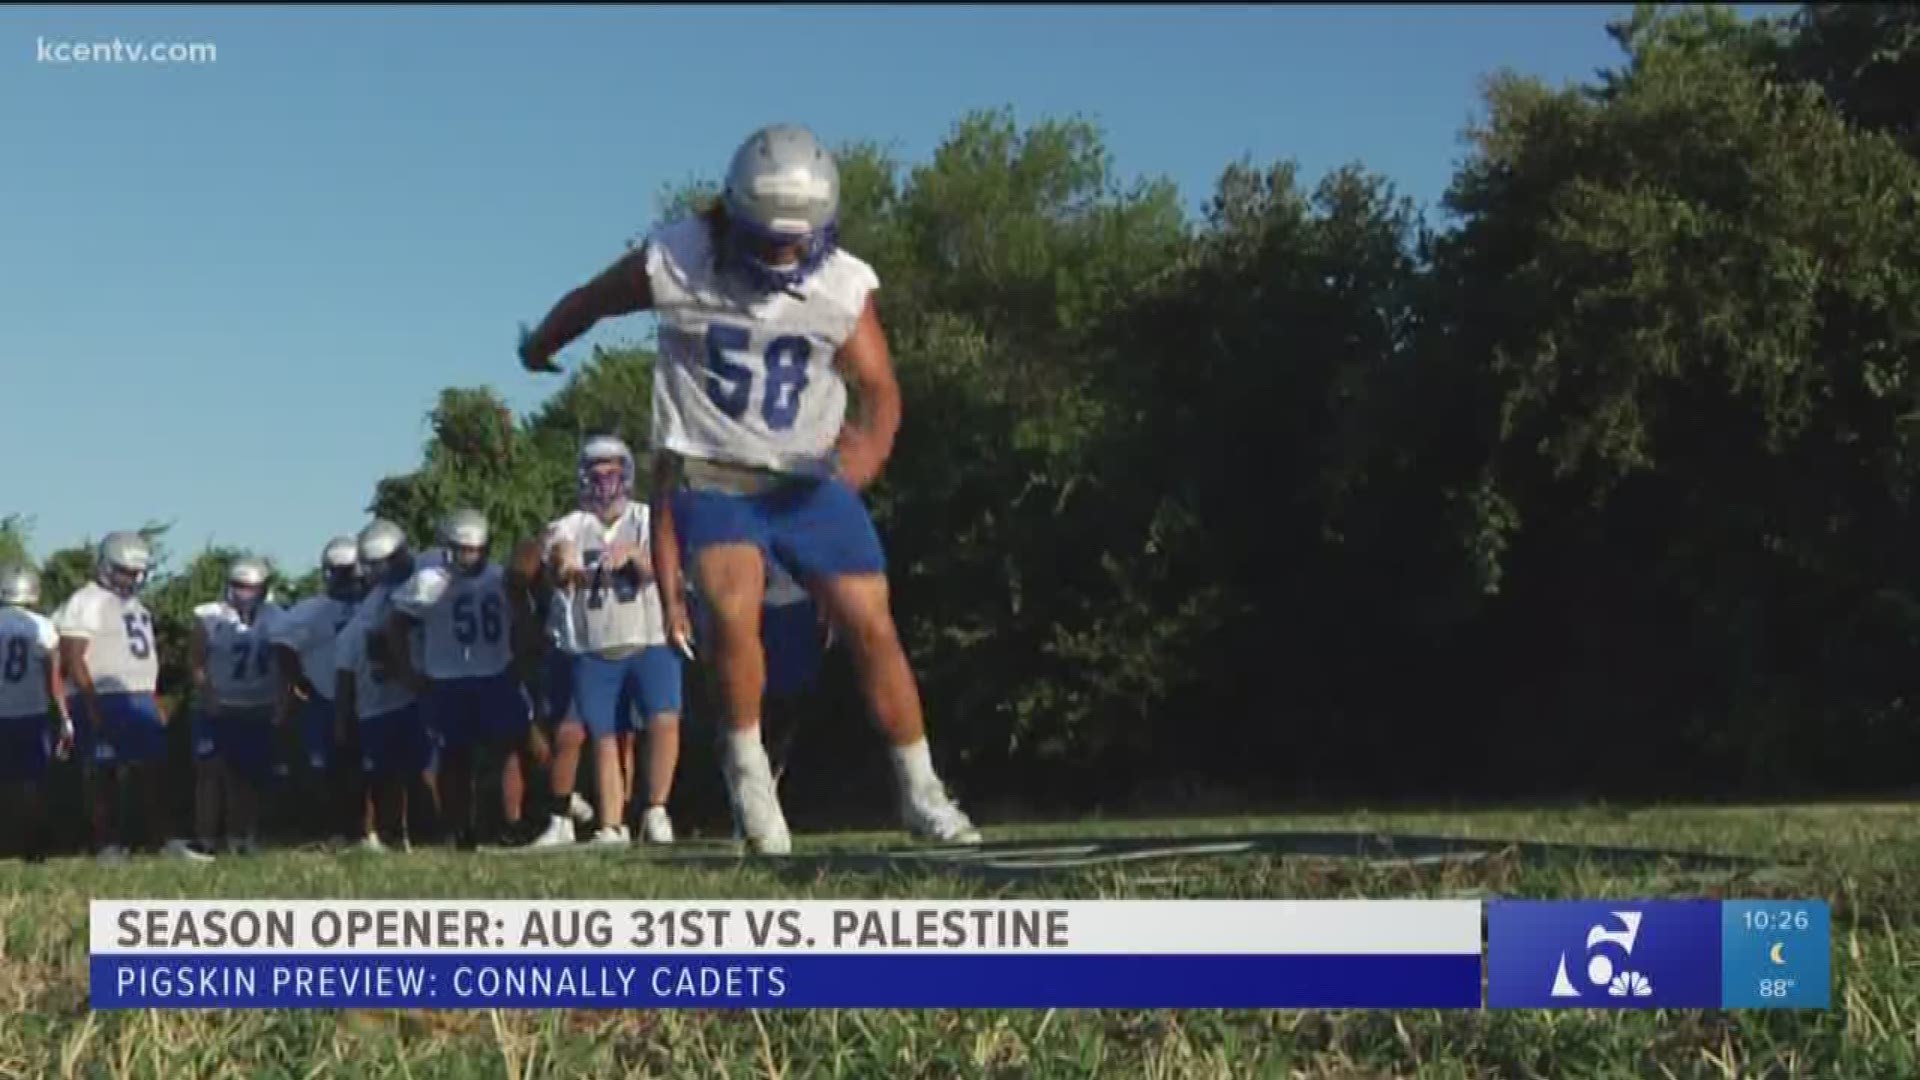 Pigskin Preview: Connally Cadets